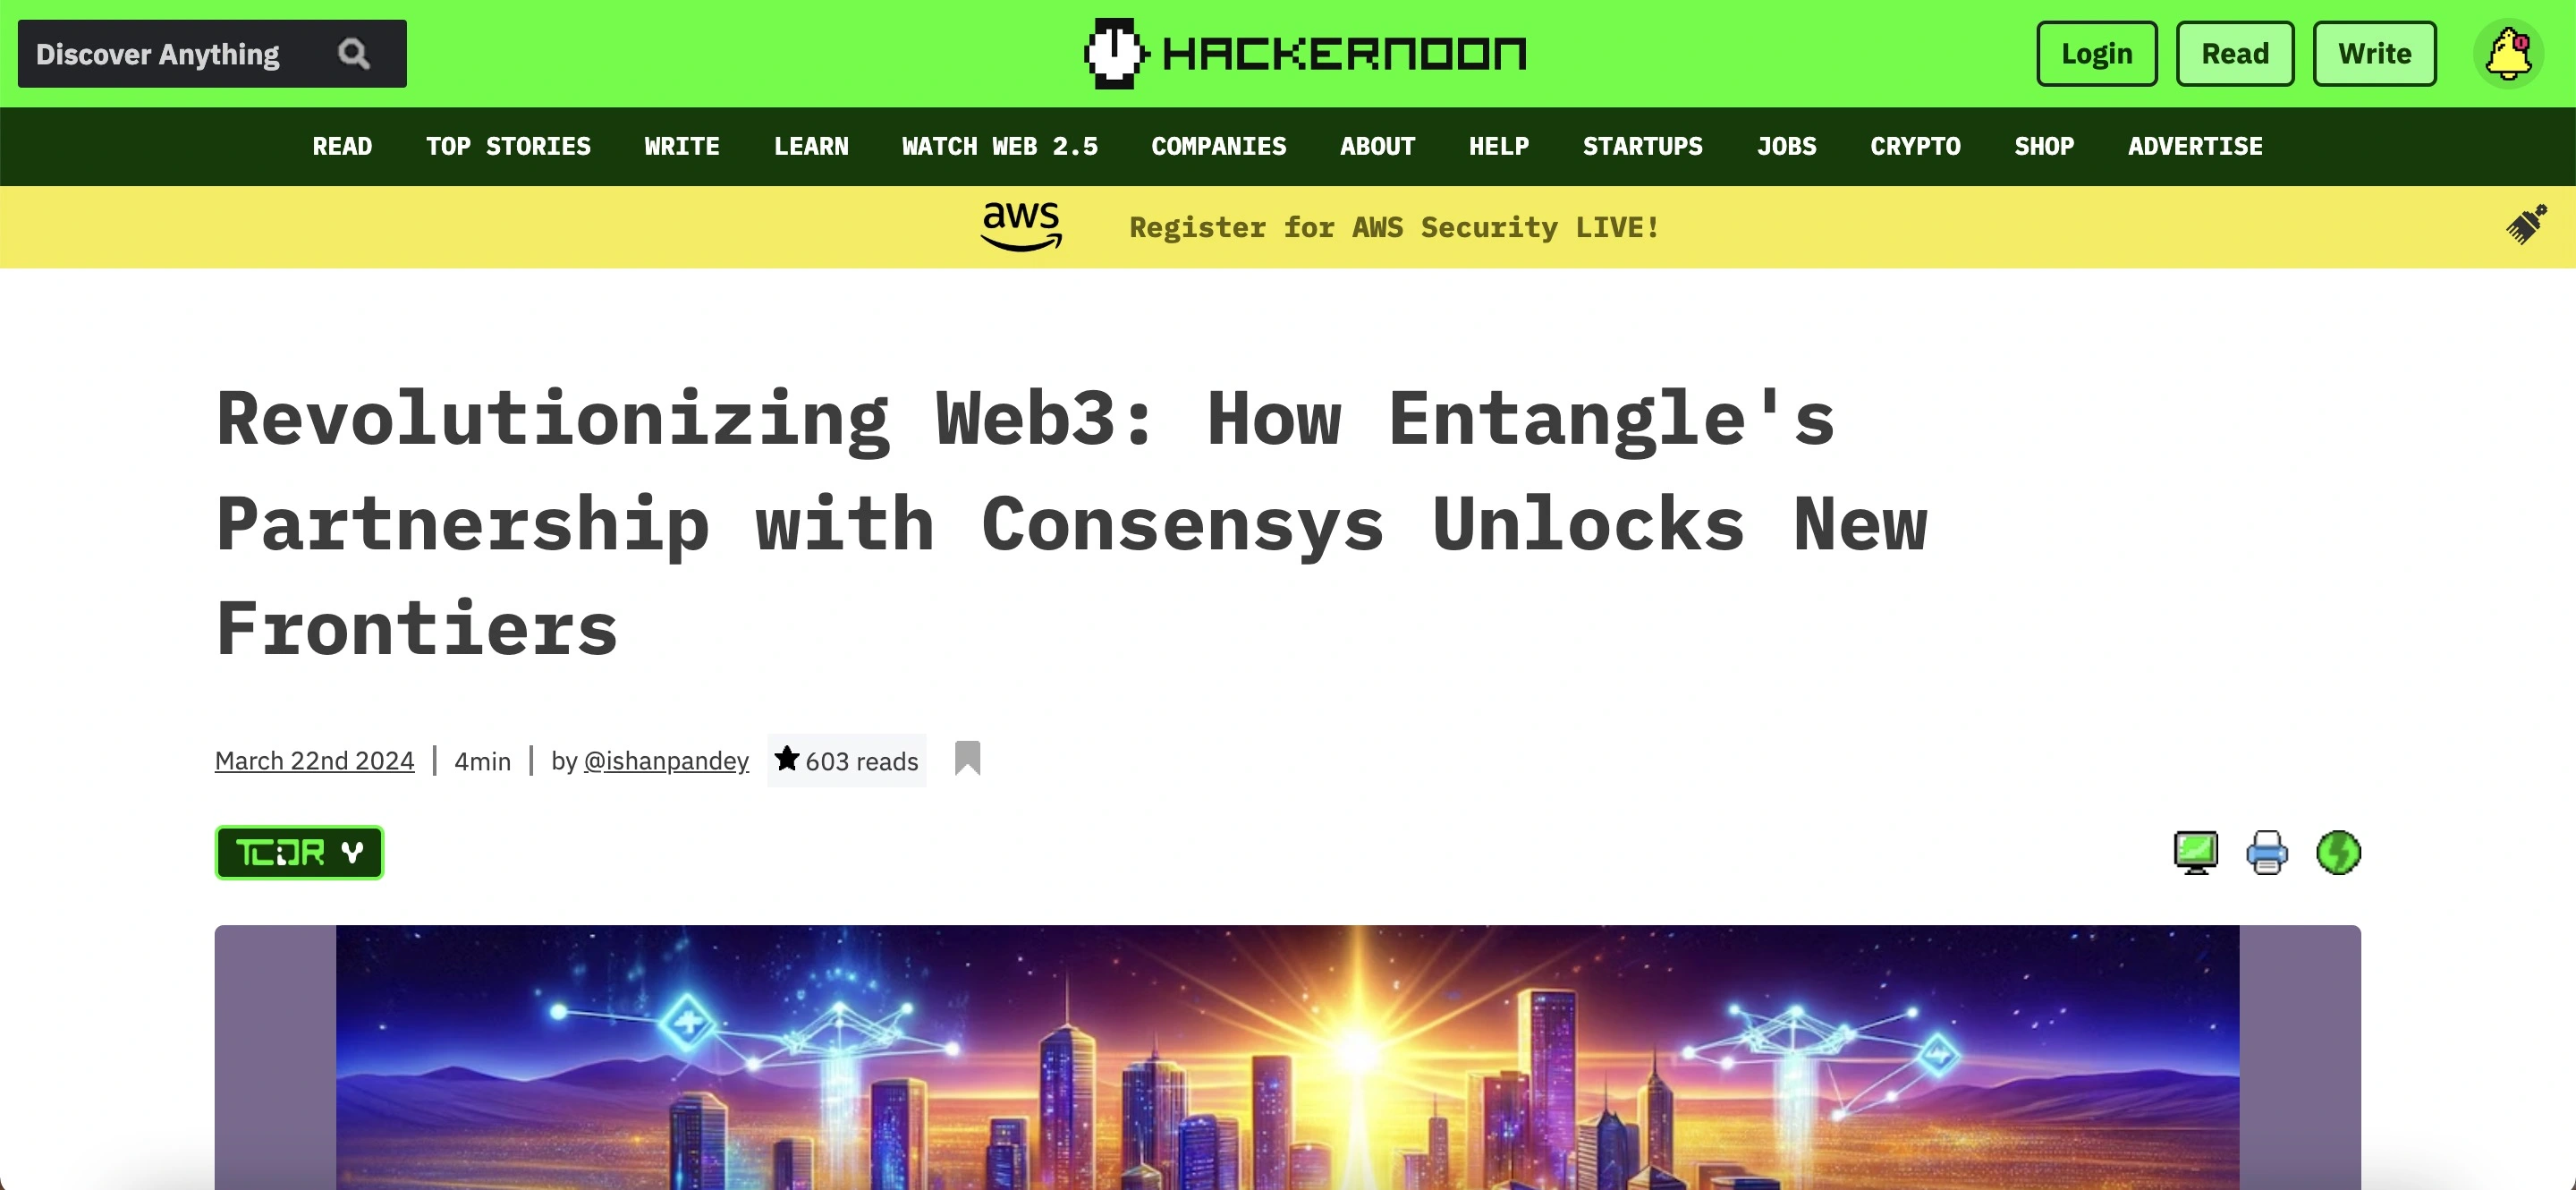 Revolutionizing Web3: How Entangle's Partnership with Consensys Unlocks New Frontiers ...